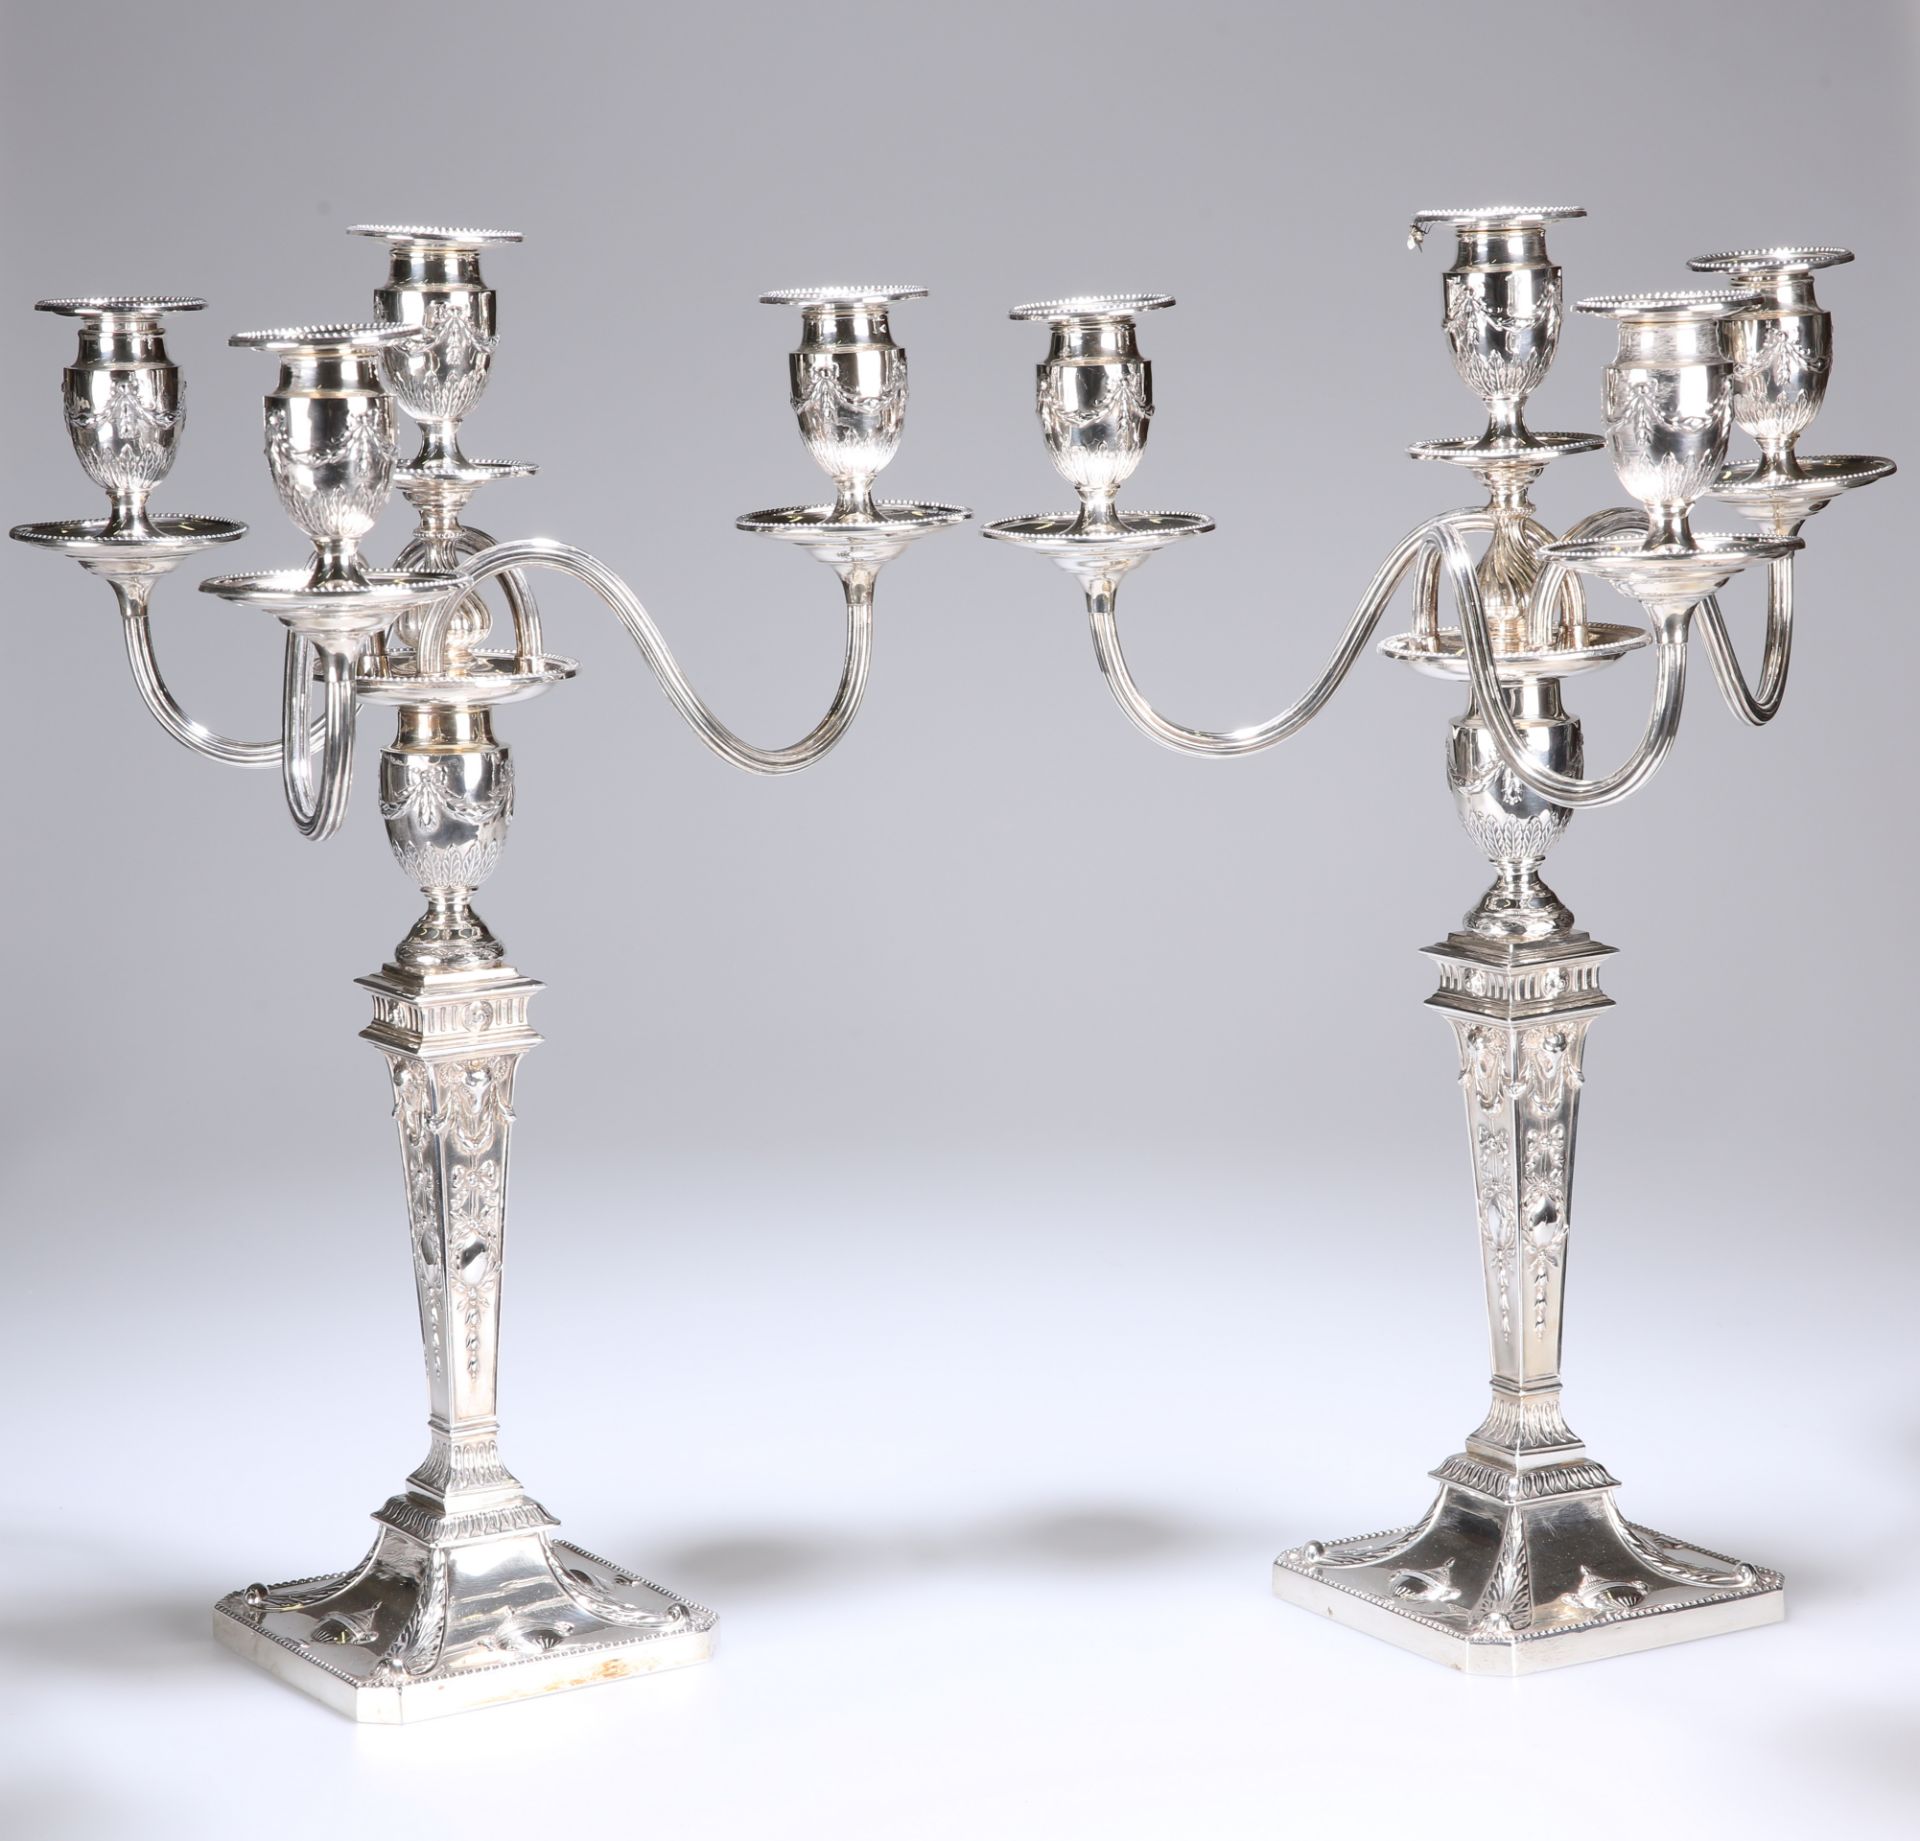 A HANDSOME PAIR OF VICTORIAN FOUR-LIGHT SILVER CANDELABRA IN THE ADAM REVIVAL TASTE